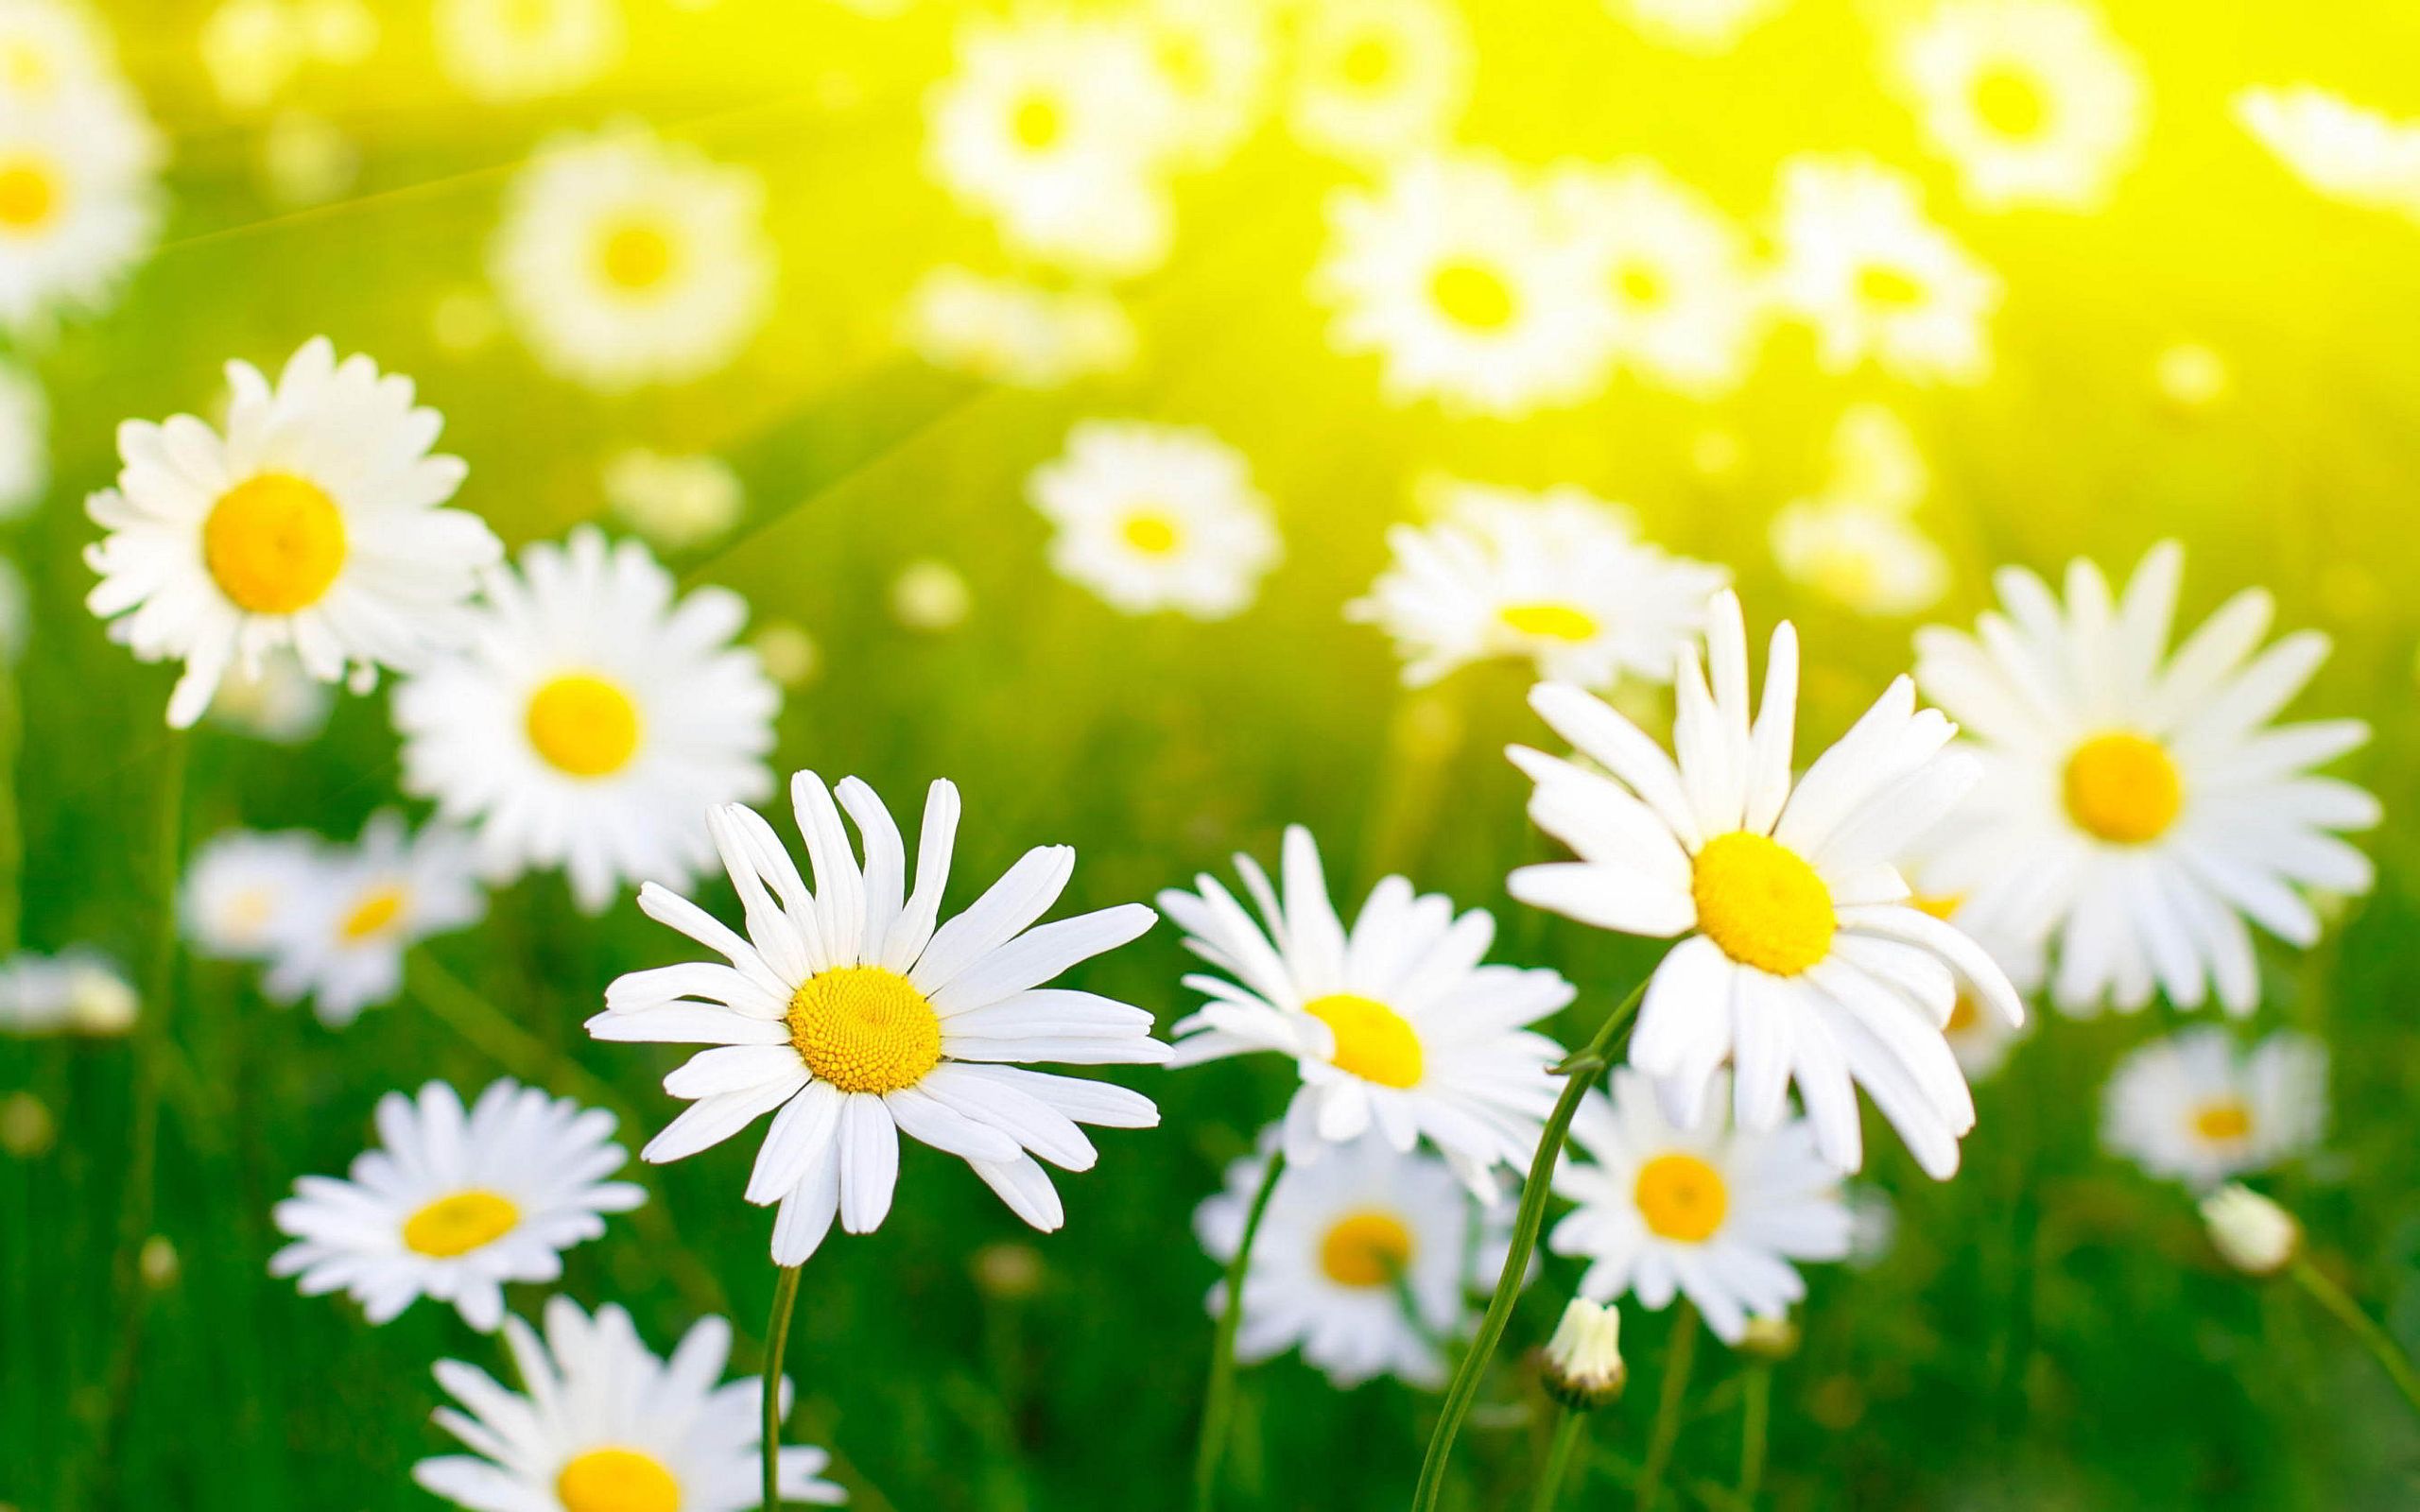 Field Of Daisies Wallpapers - Wallpaper Cave